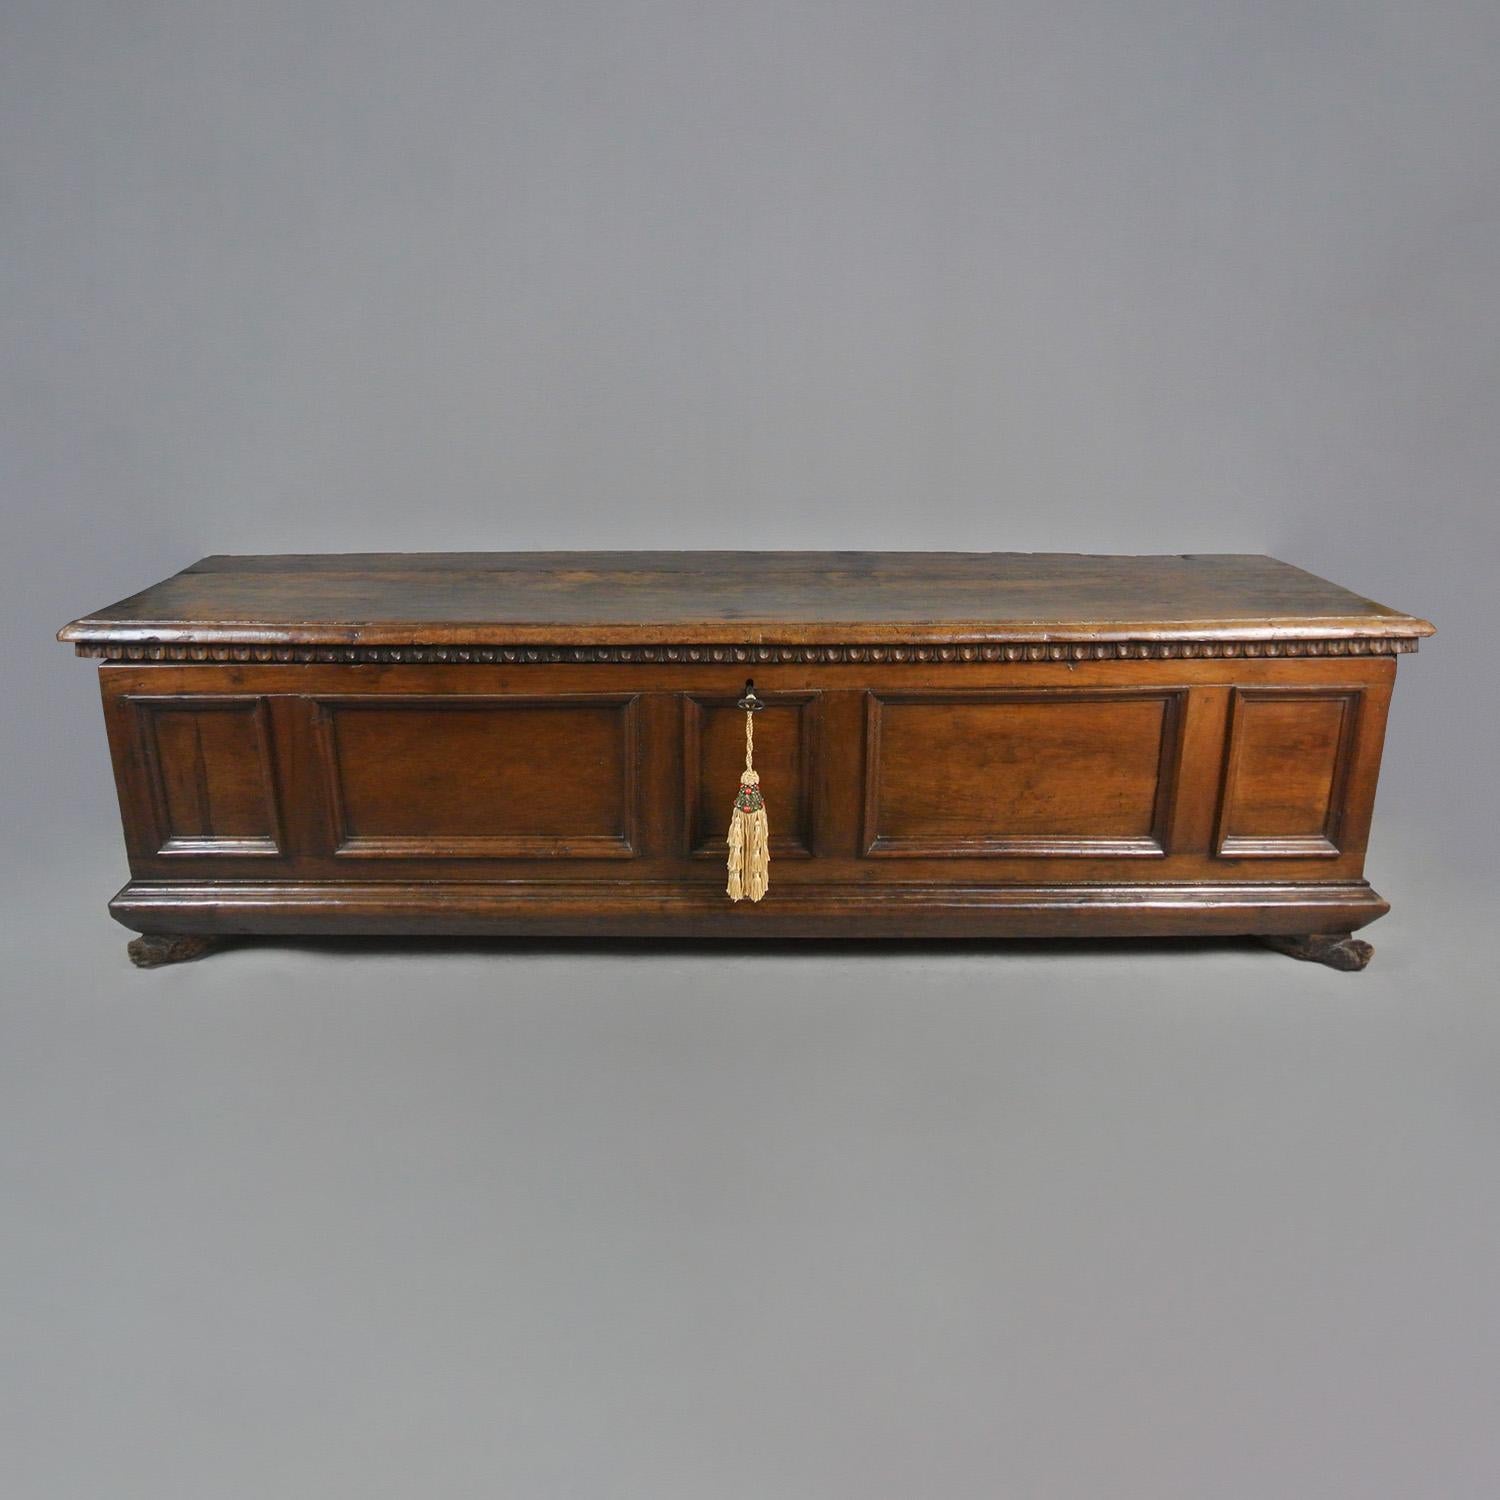 A very wide and beautiful sword chest in solid walnut and of superb colour and patination.

The chest is set on carved lion paw front feet and retains its original snaped iron hinges and original iron lock and key.

With egg and dart border to the